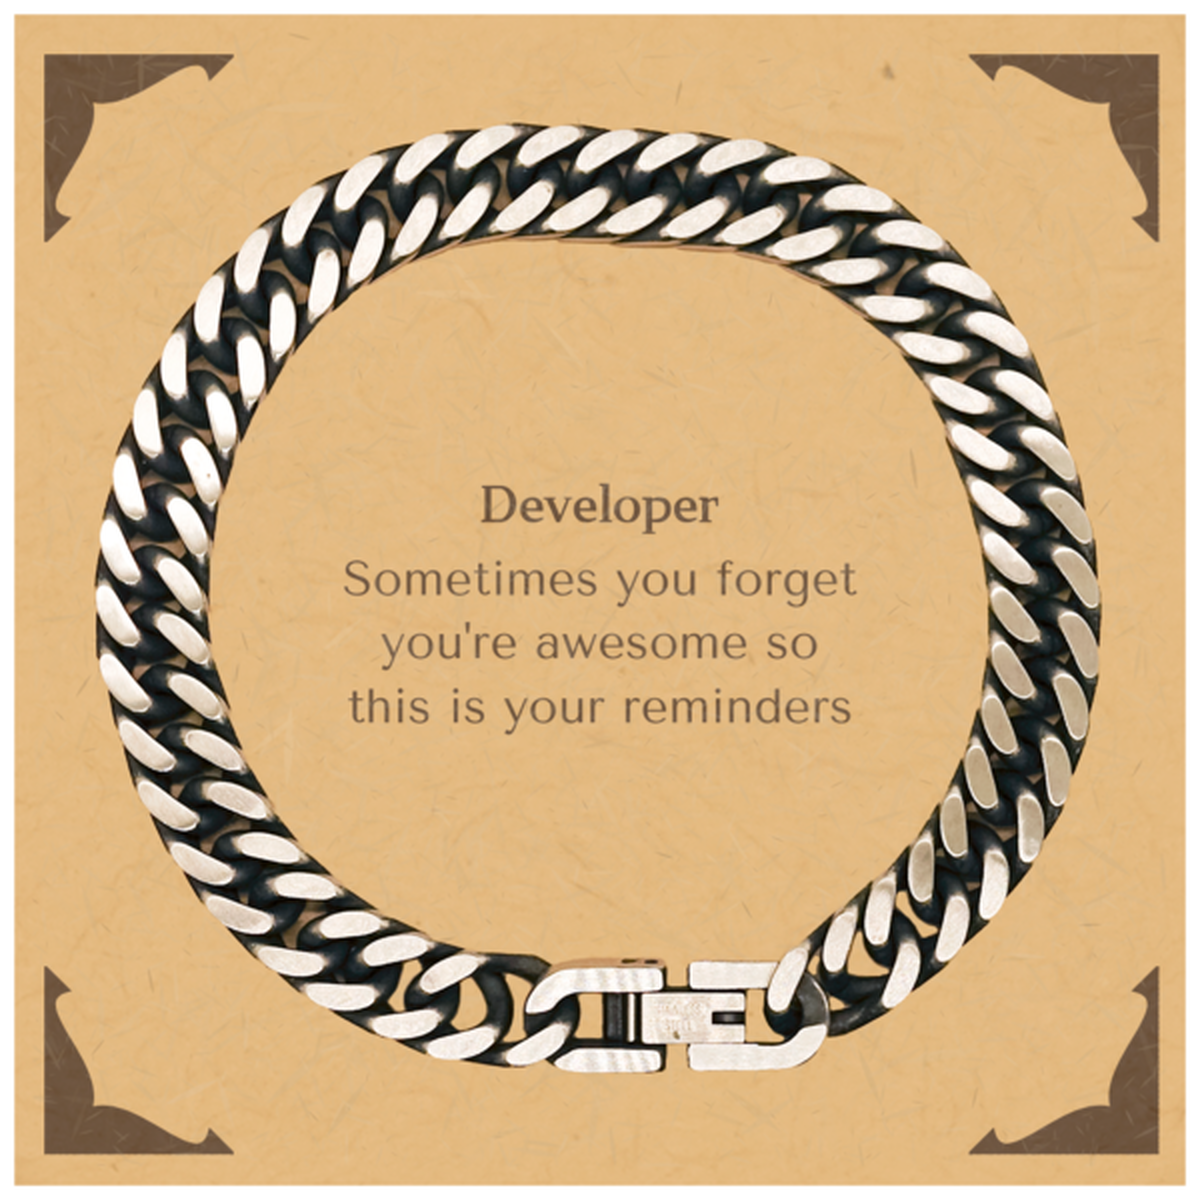 Sentimental Developer Cuban Link Chain Bracelet, Developer Sometimes you forget you're awesome so this is your reminders, Graduation Christmas Birthday Gifts for Developer, Men, Women, Coworkers